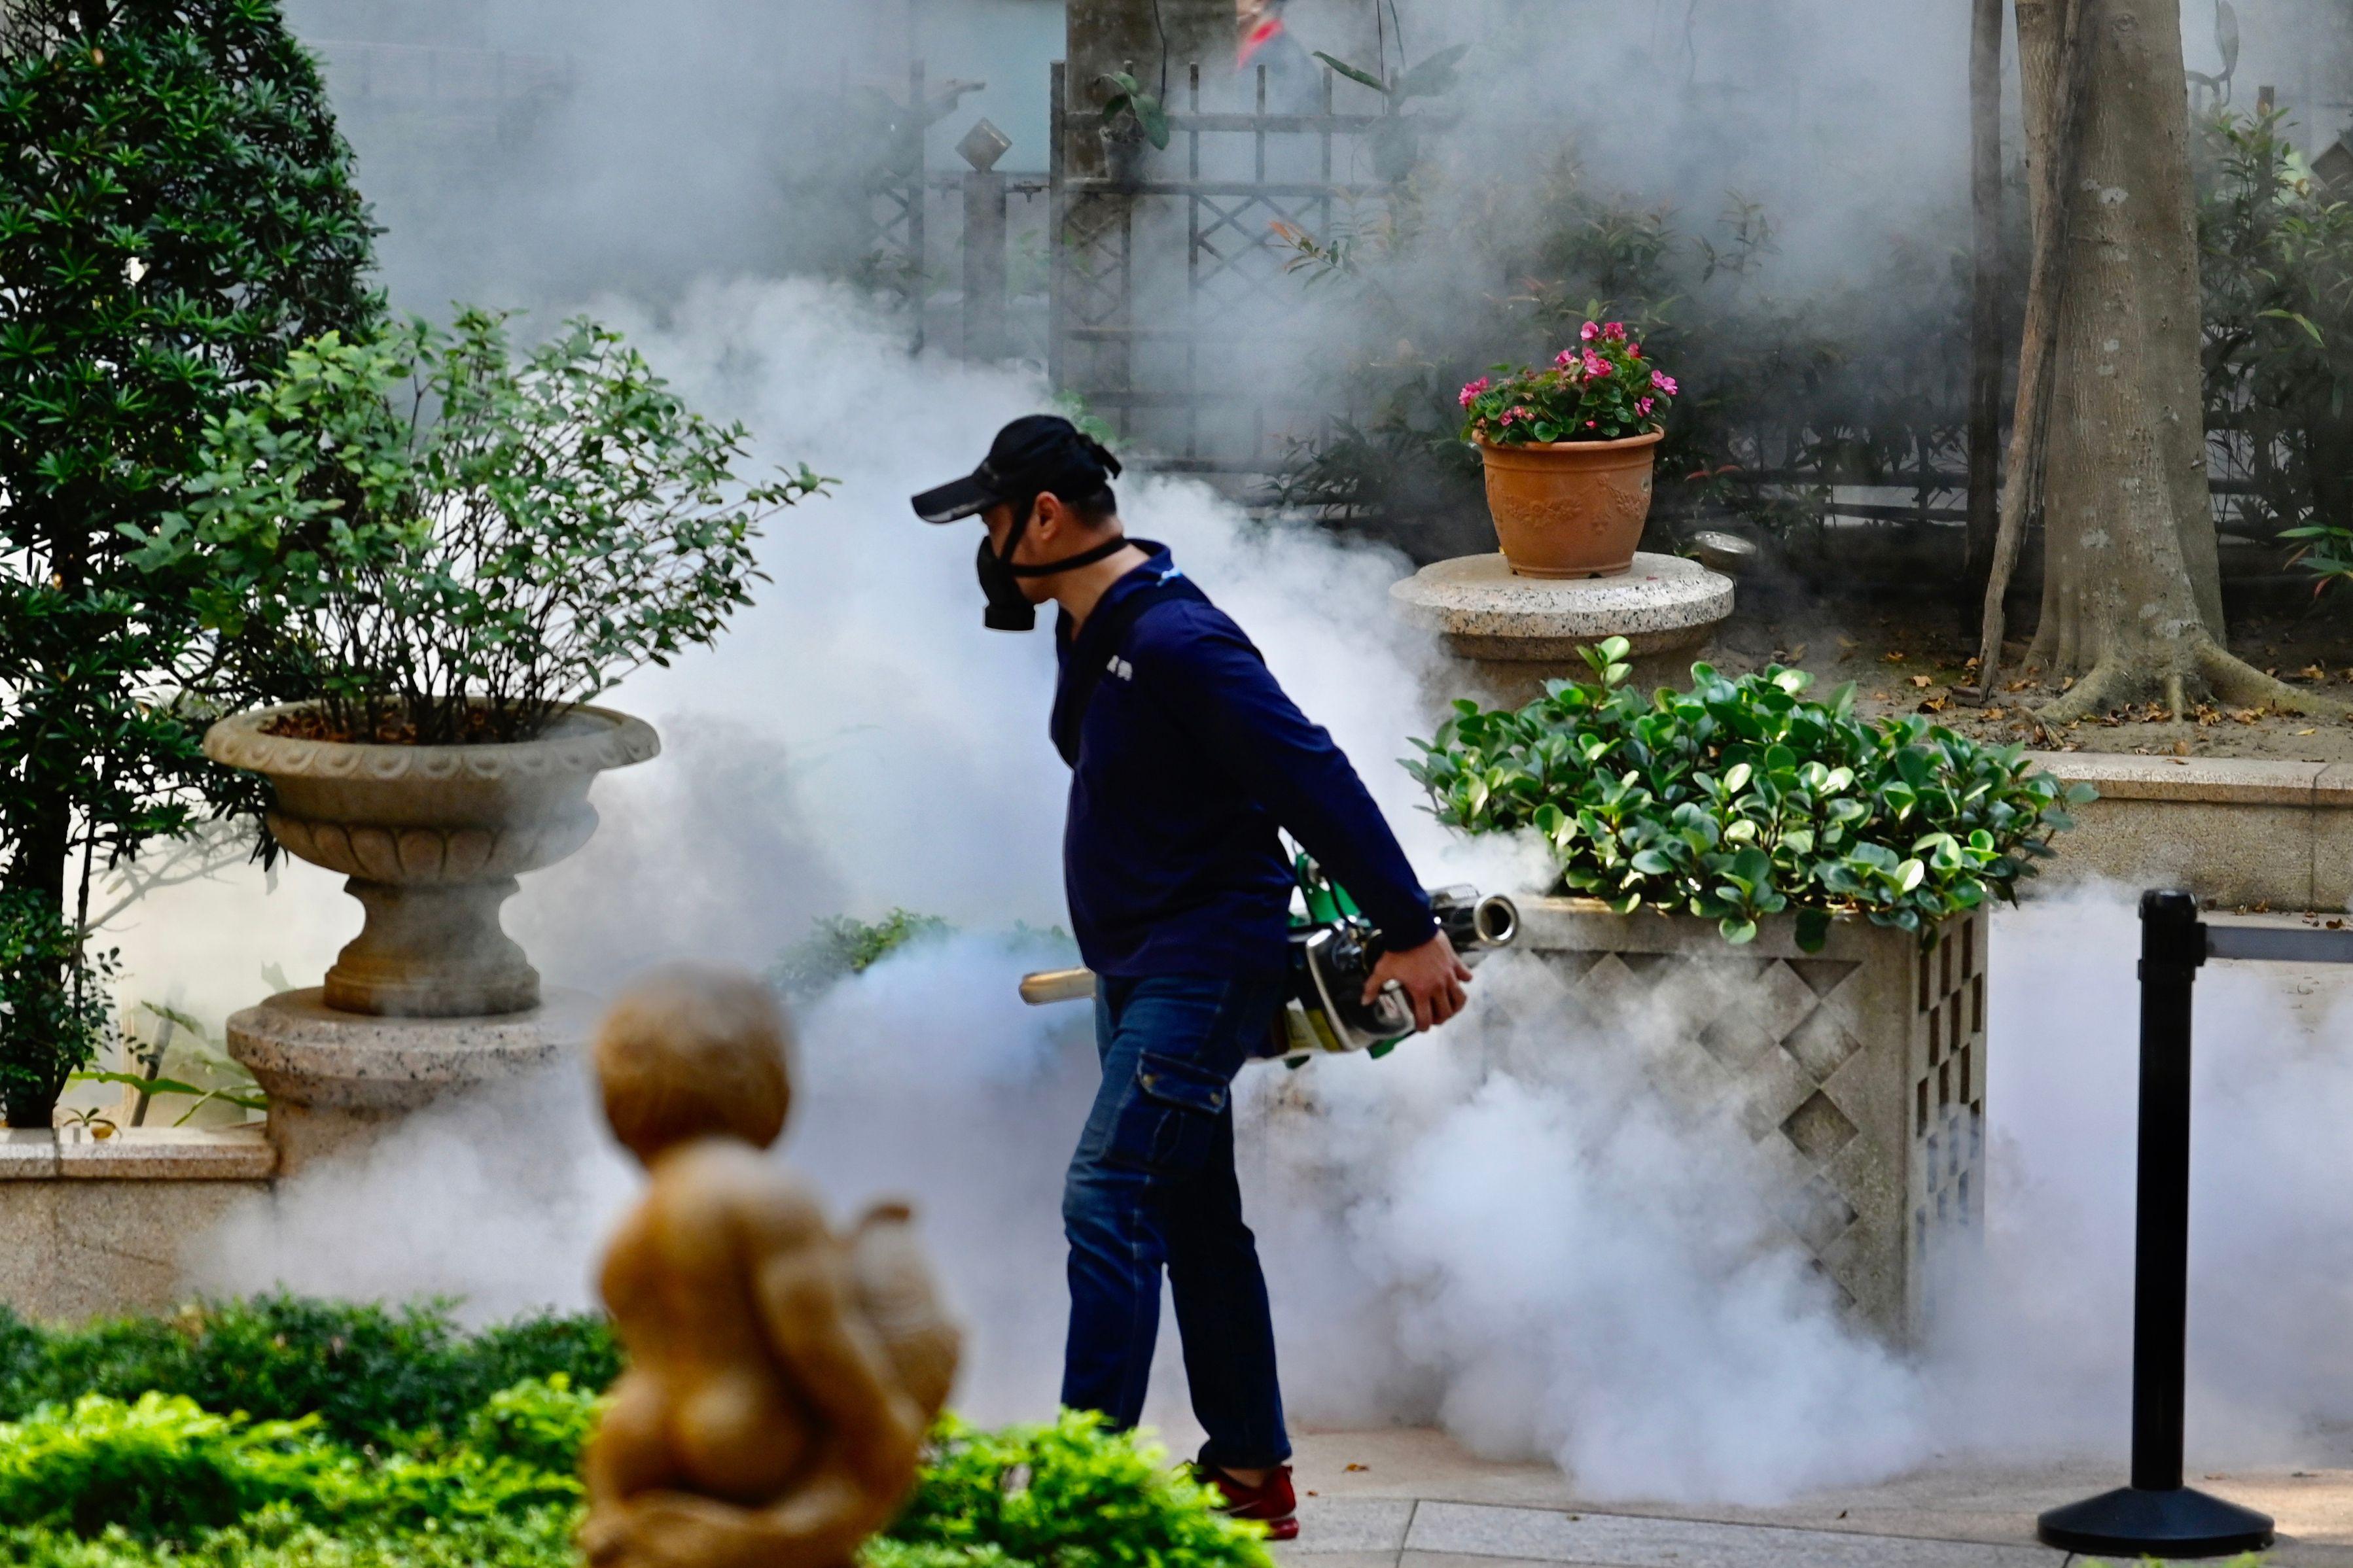 A mask-clad worker with a handheld machine walks on a street amid potted plants before billows of smoke. 